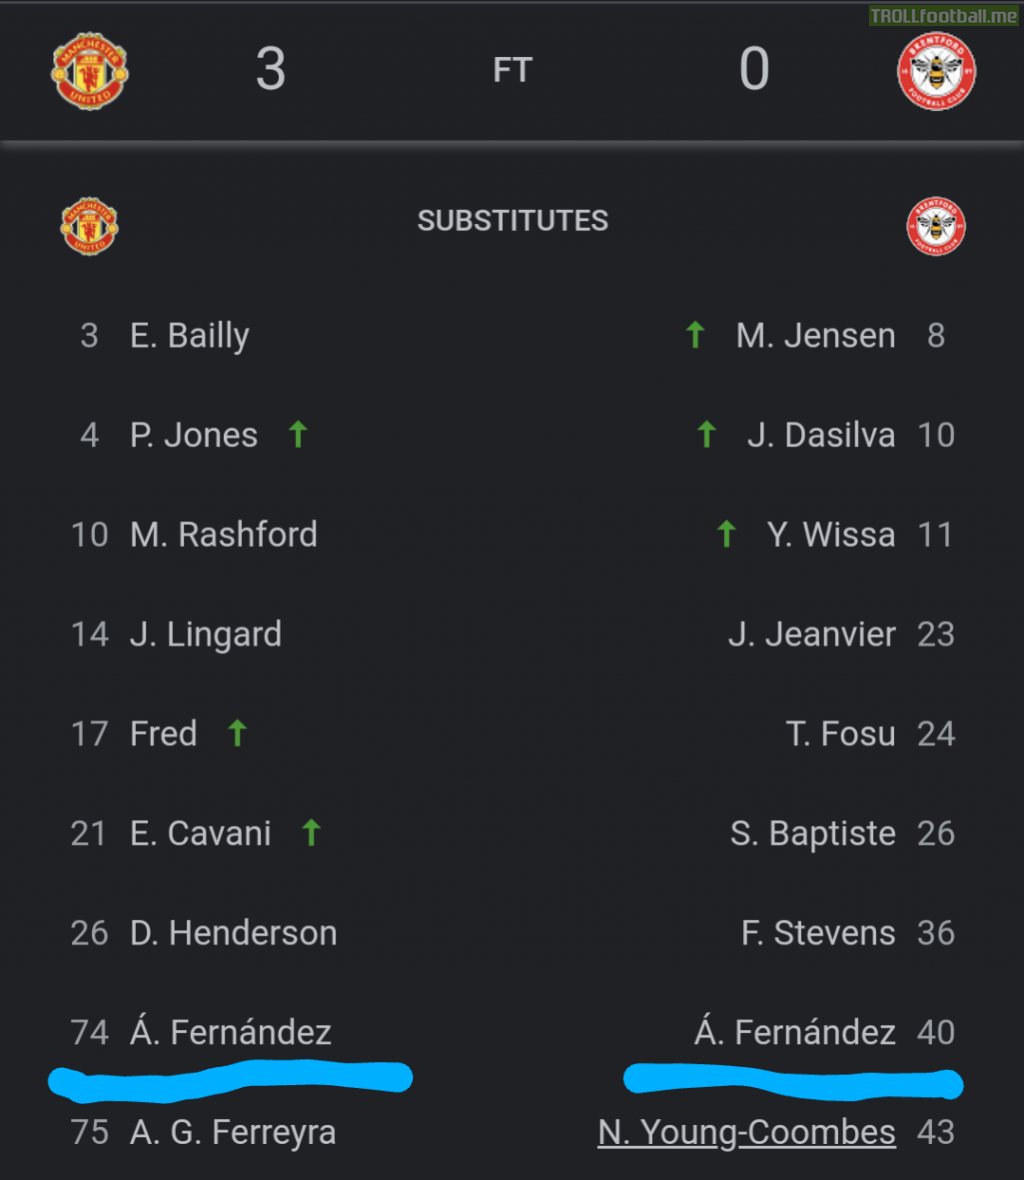 Manchester United vs. Brentford both has their own "Bruno Fernandez at home" variants with the exact same name on the same line of the score sheet